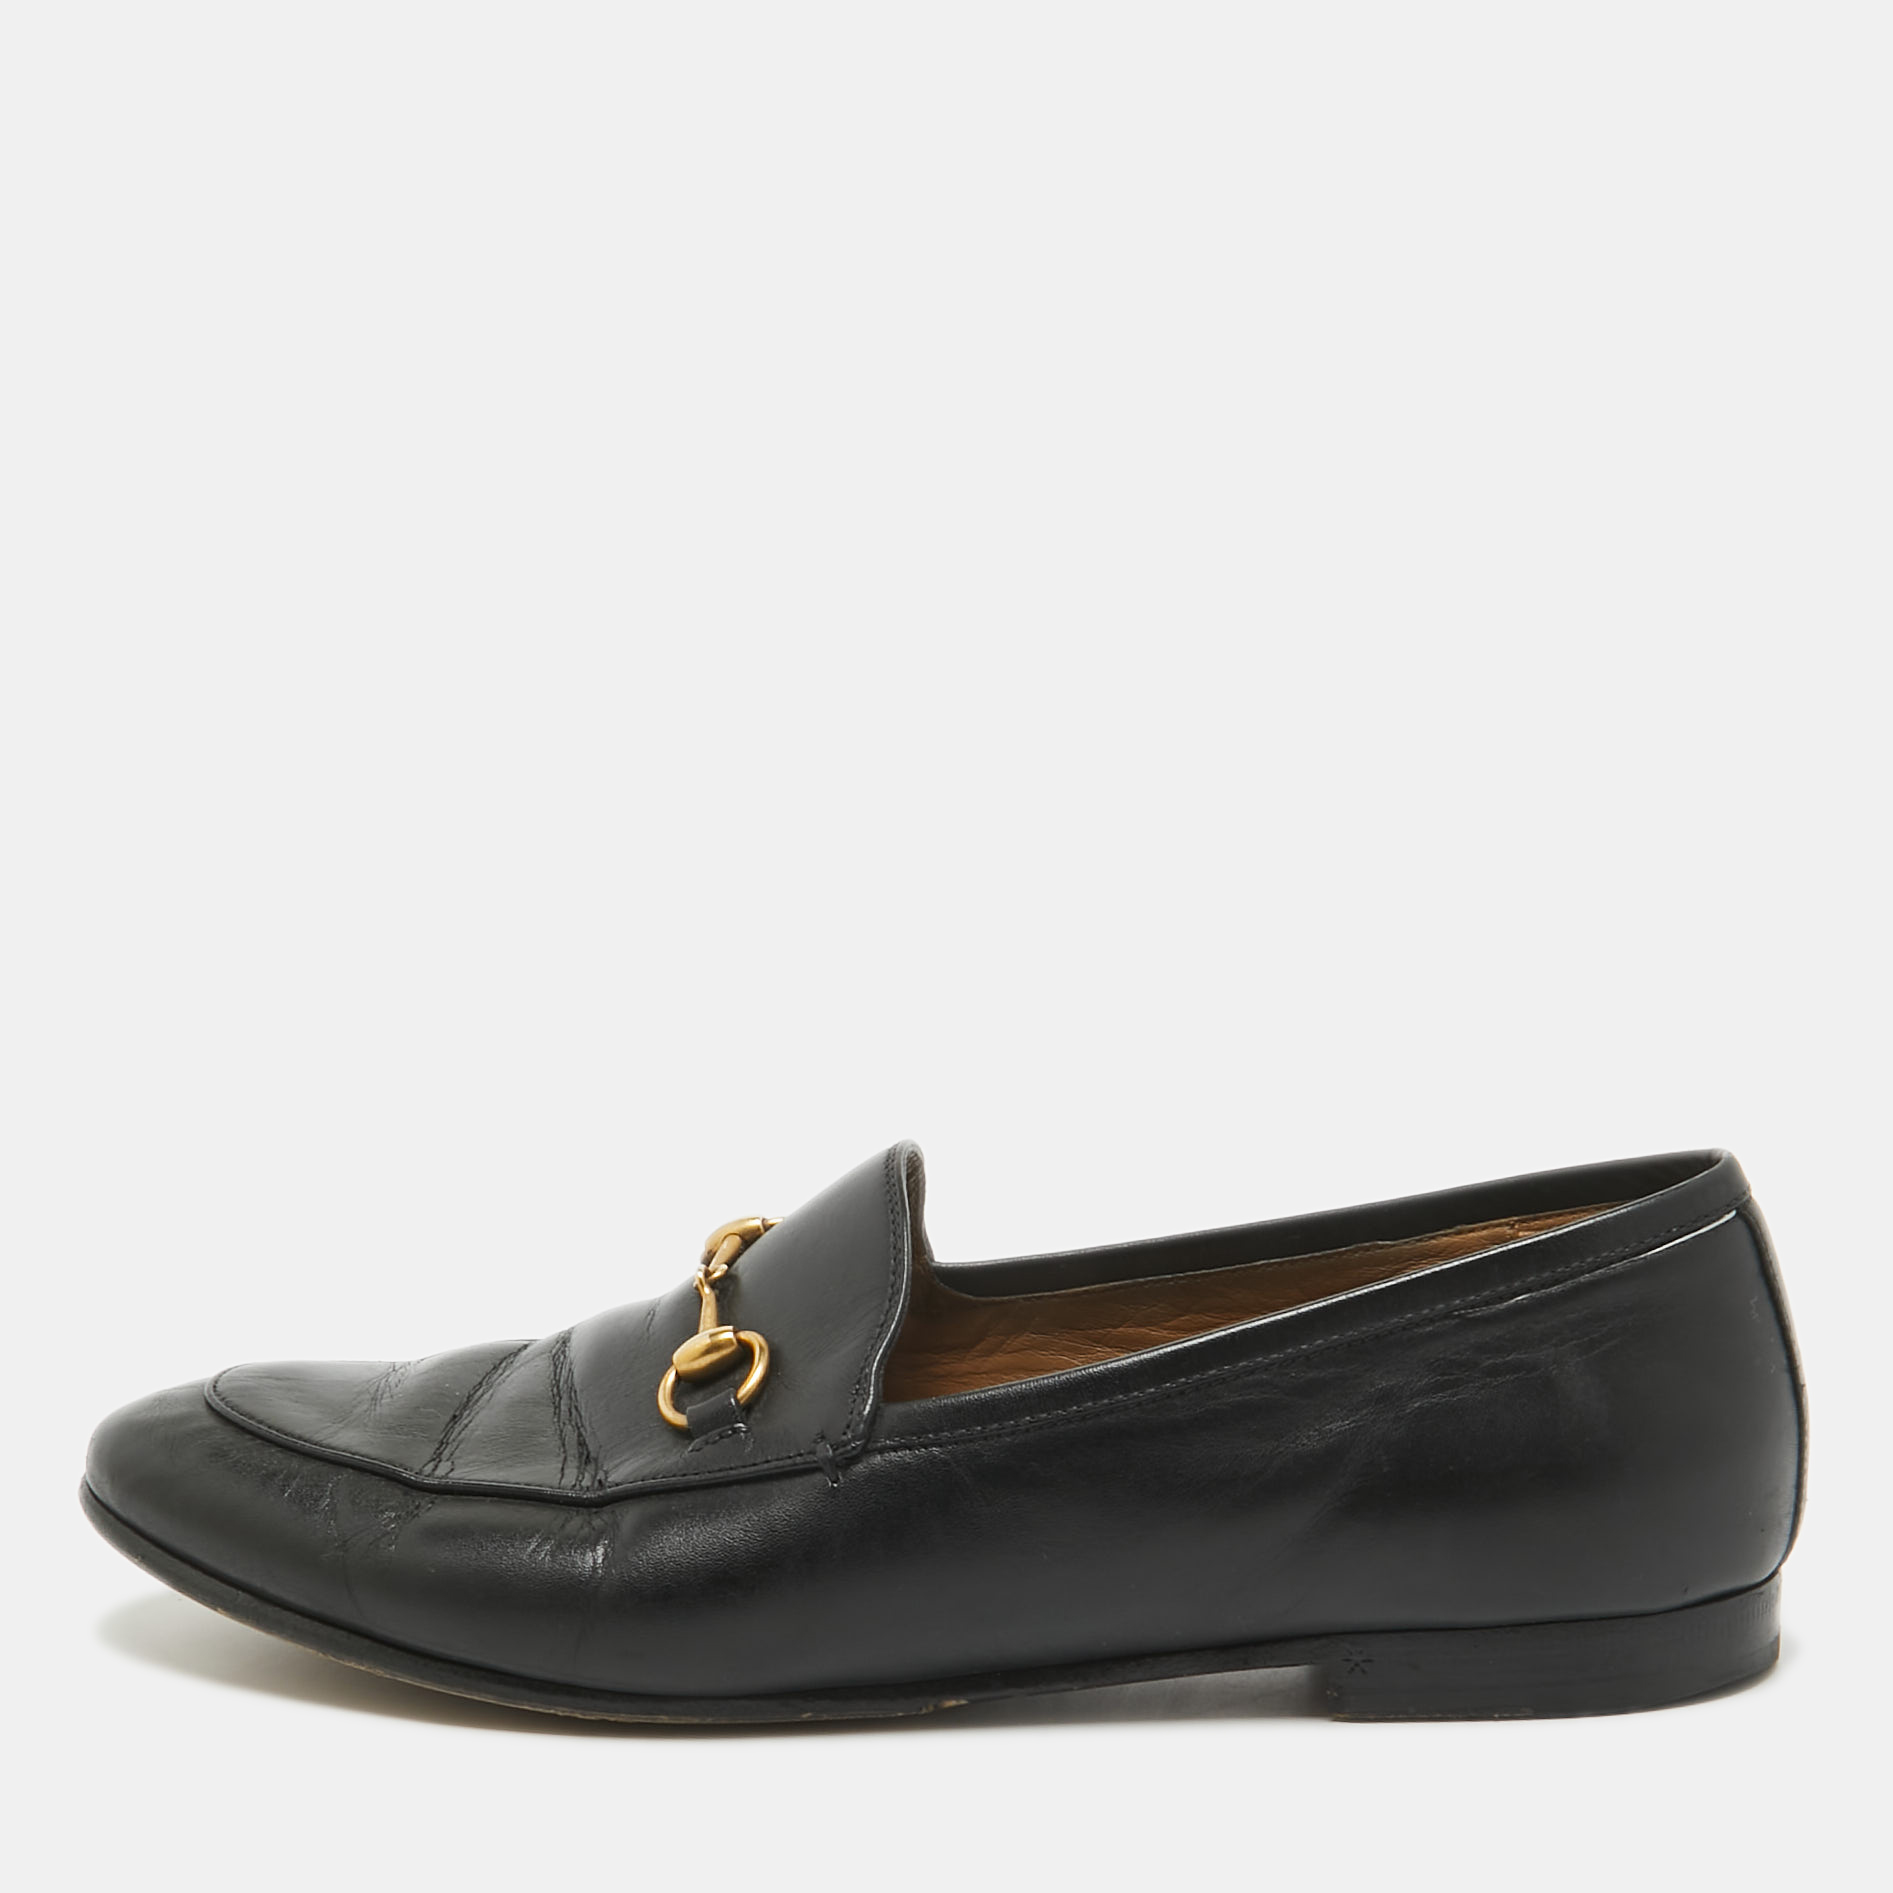 Pre-owned Gucci Black Leather Jordaan Loafers Size 39